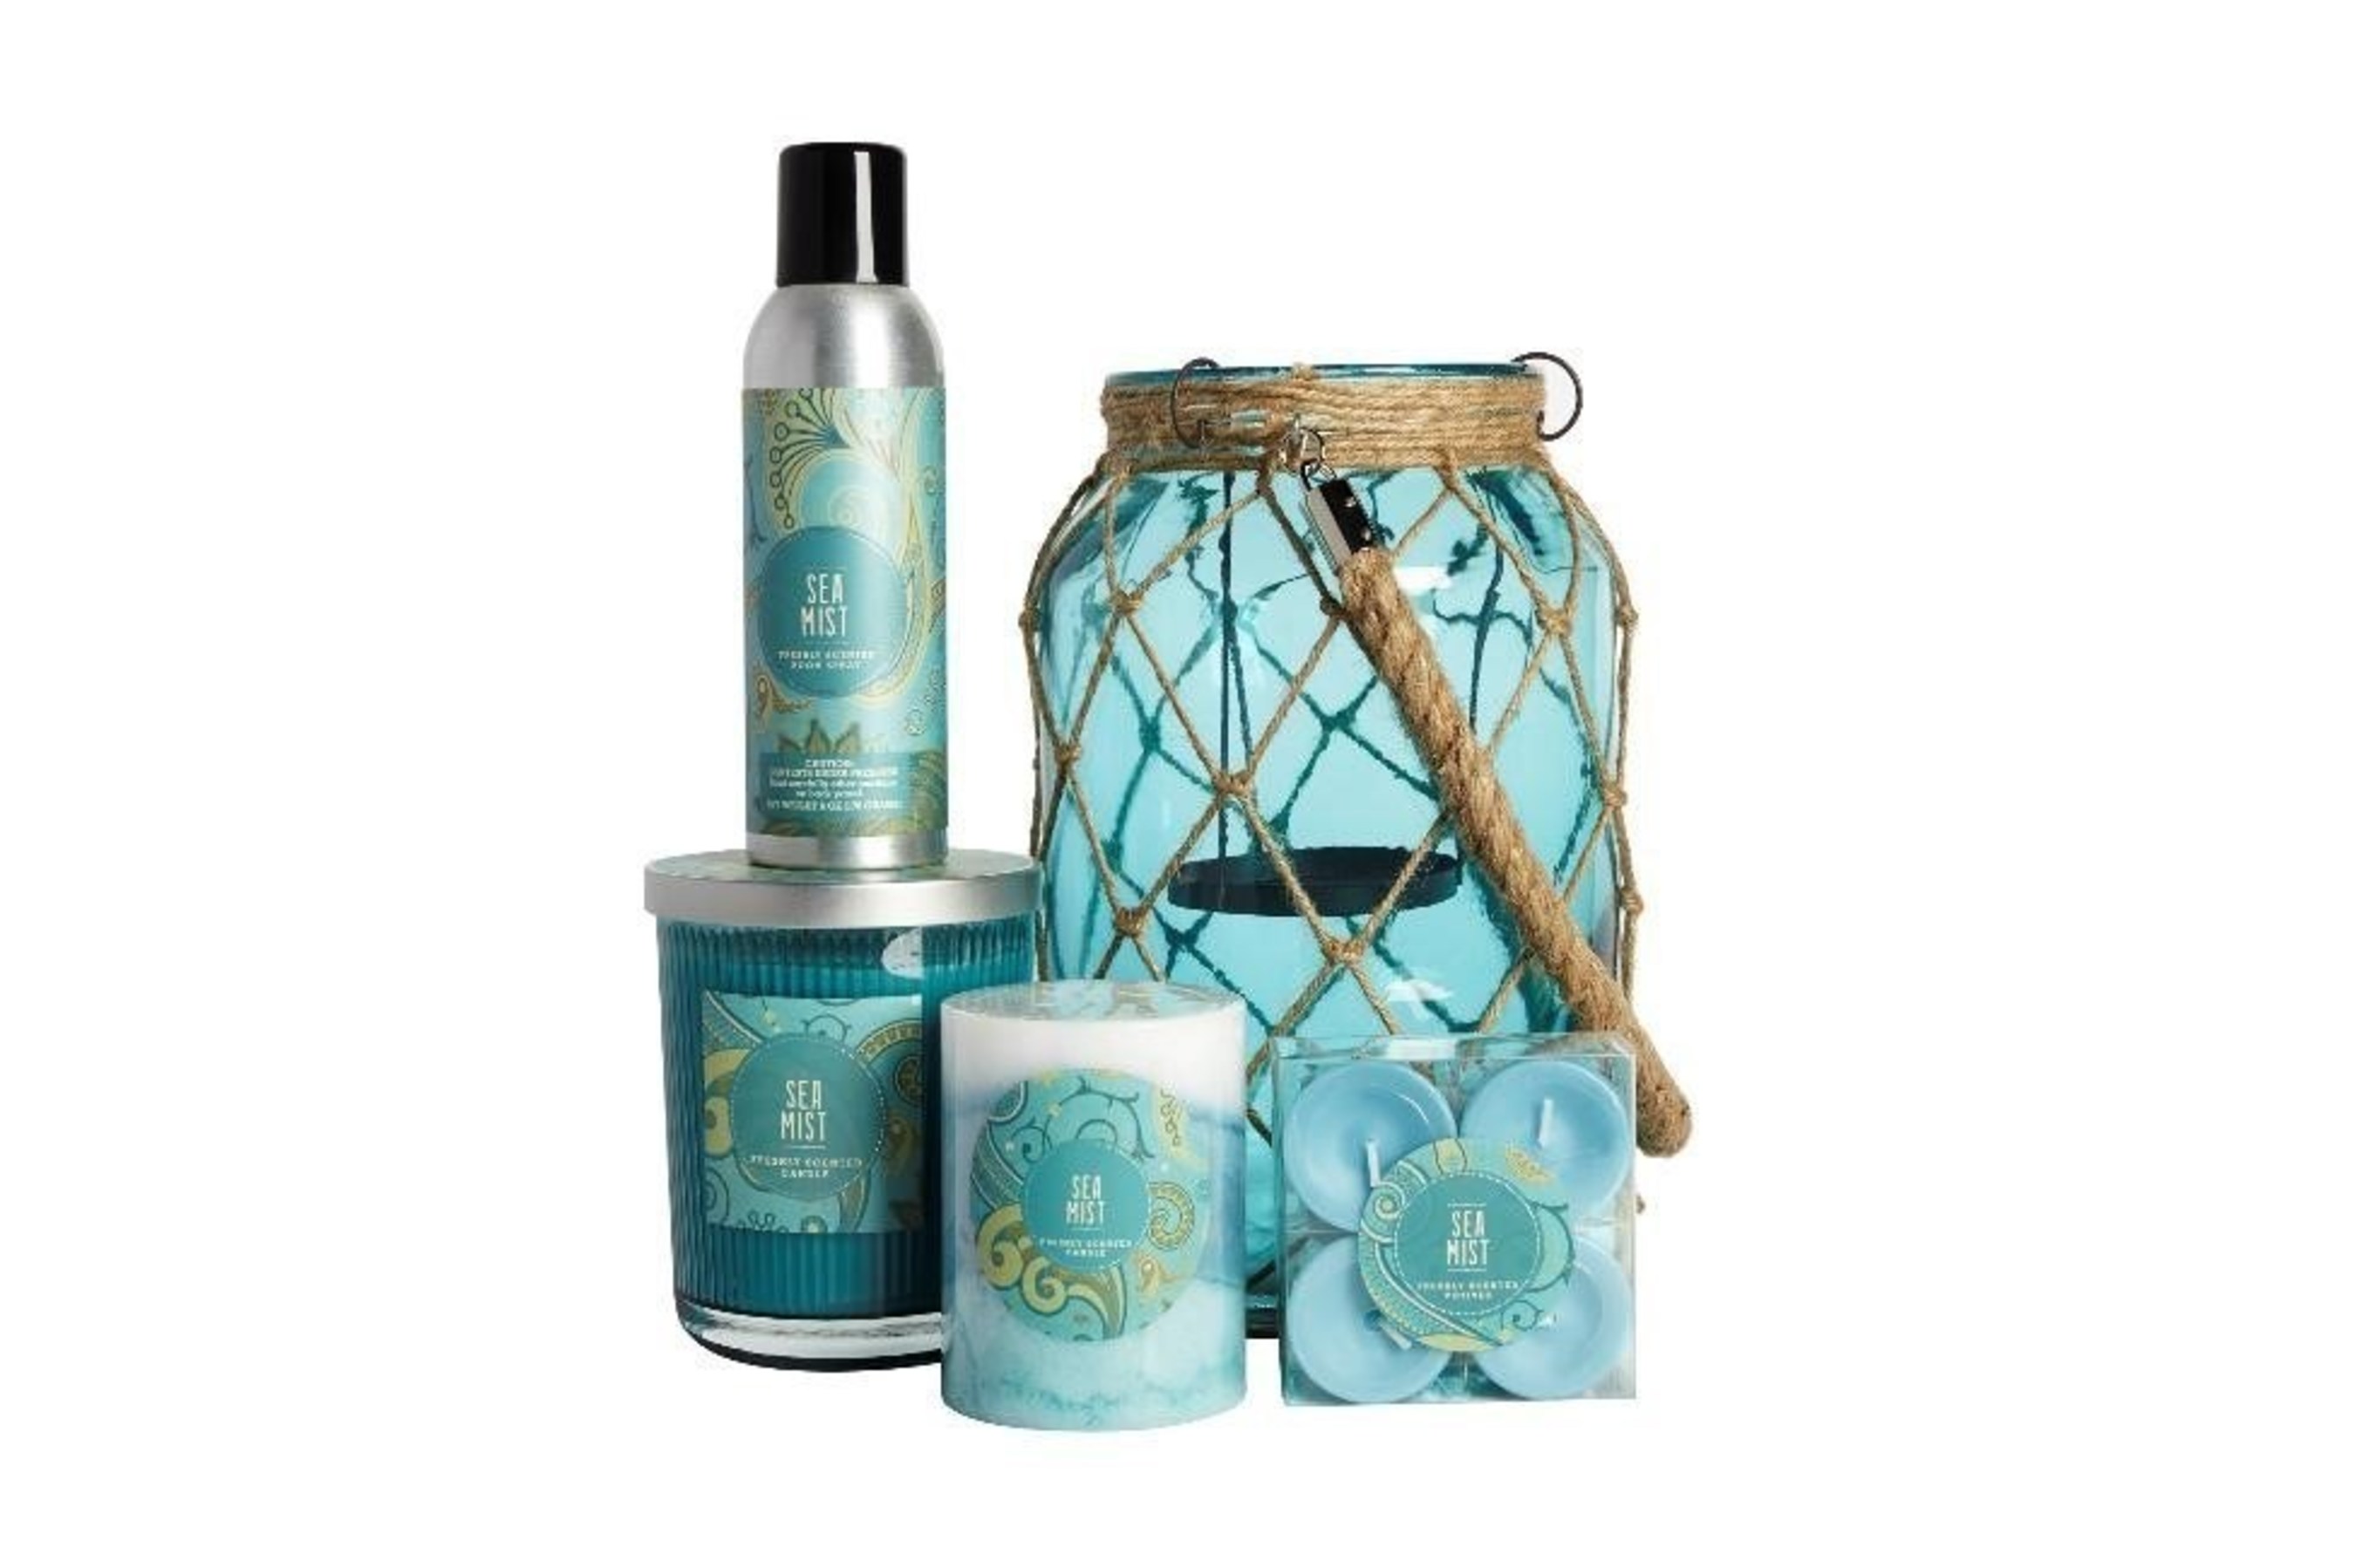 Freshen up the Rooms: A relaxing home extends beyond the eyes, and you can help Mom freshen up the spaces in the house with one of At Home's 12 exclusive scents including Lime Cilantro, Sea Mist and Island Mango. Home sprays and candles start at $2.99.